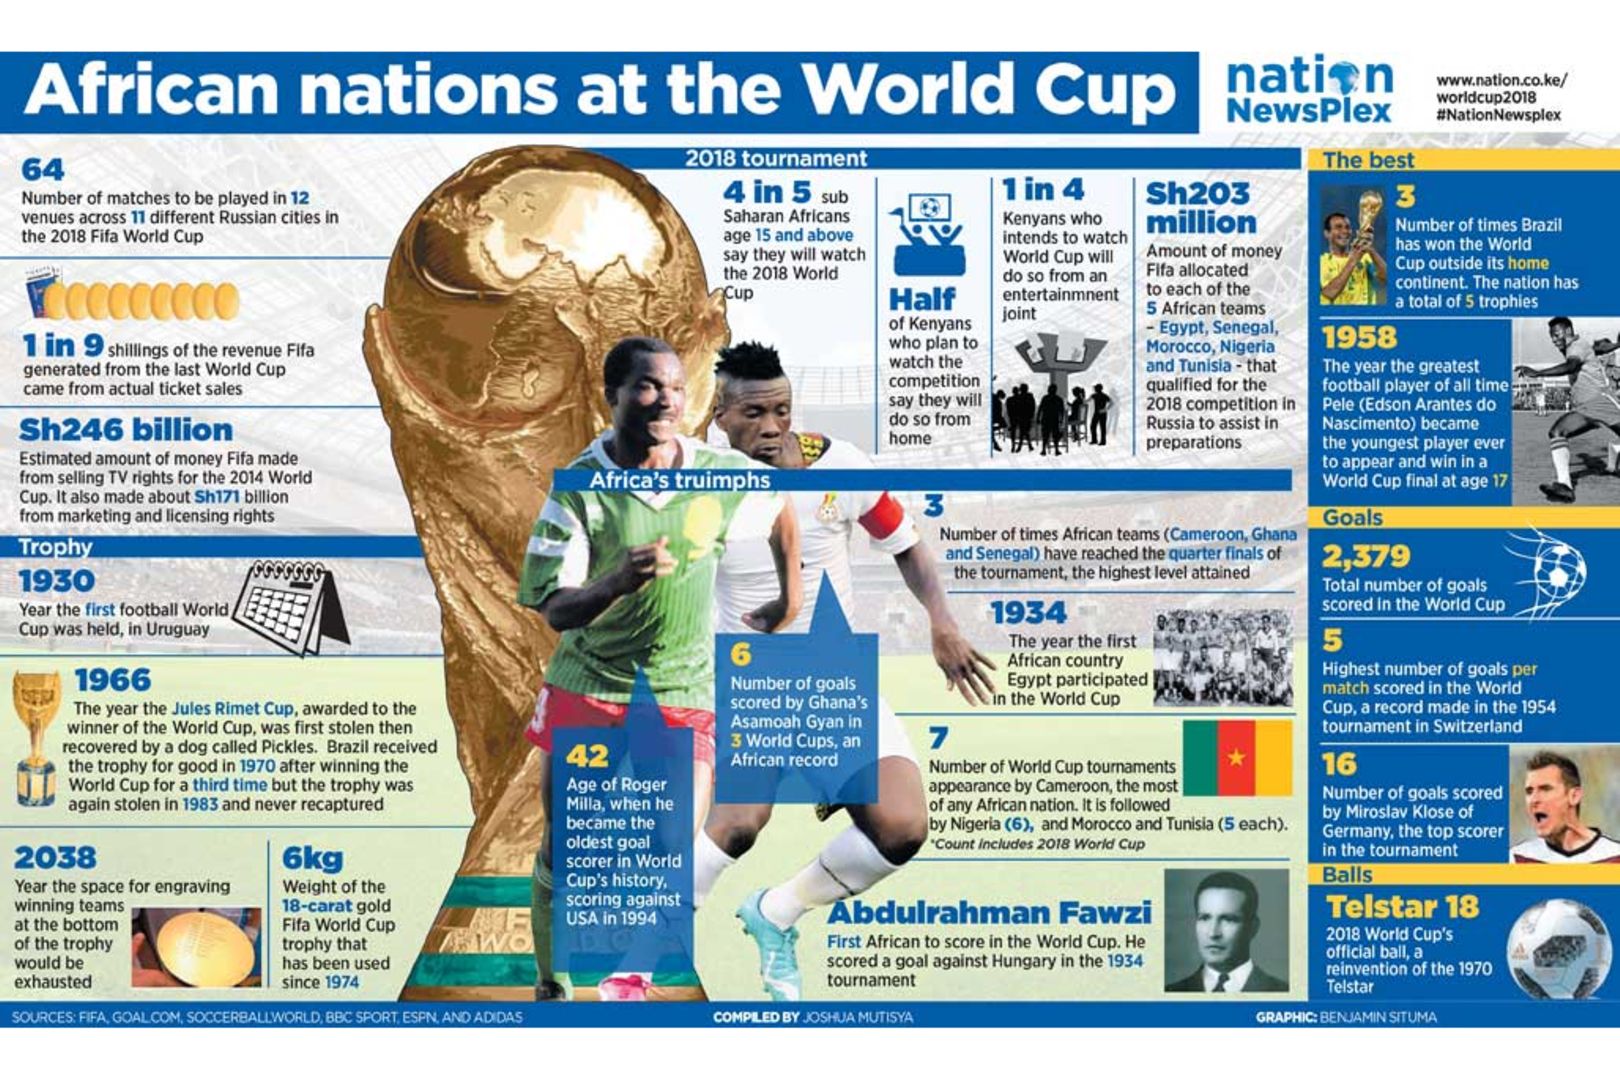 Fun facts on the World Cup, biggest, most exalted sporting event on the planet Nation